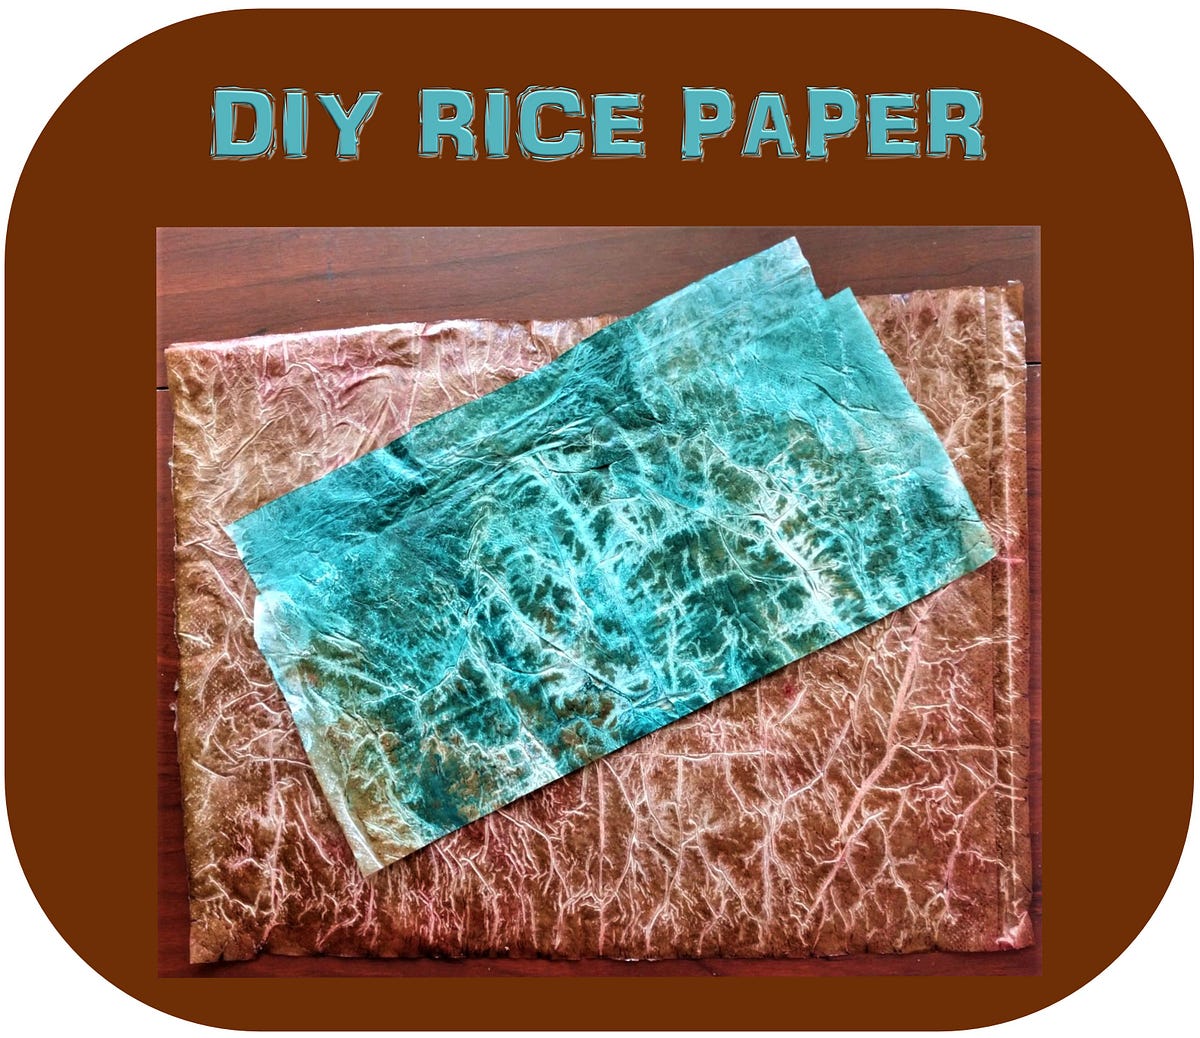 DIY Rice Paper and 7 Ways to Use It | by Celeste Wilson | The DIY Diaries |  Medium